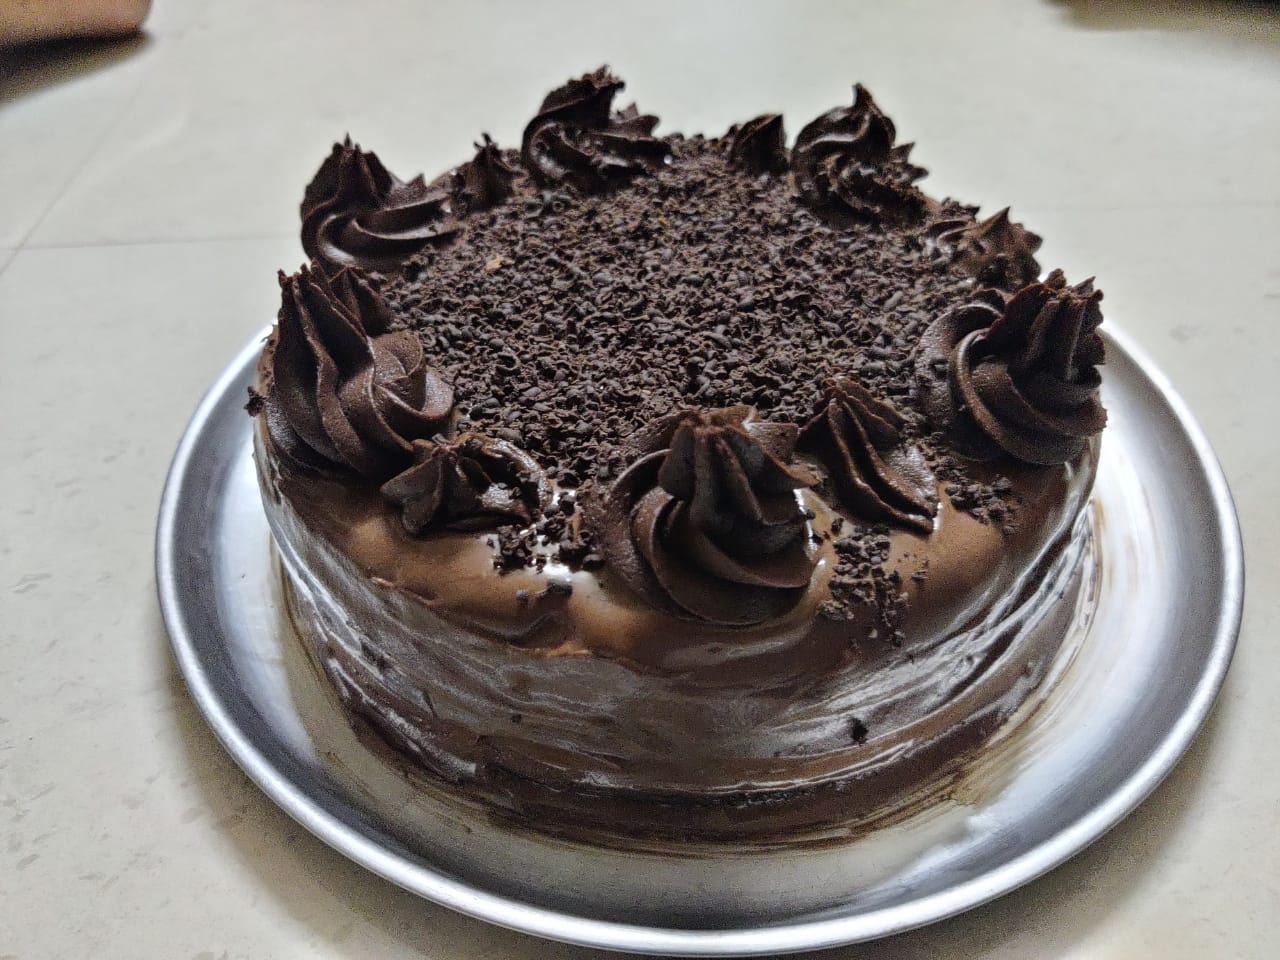 Chocolate Overload Cake Designs, Images, Price Near Me